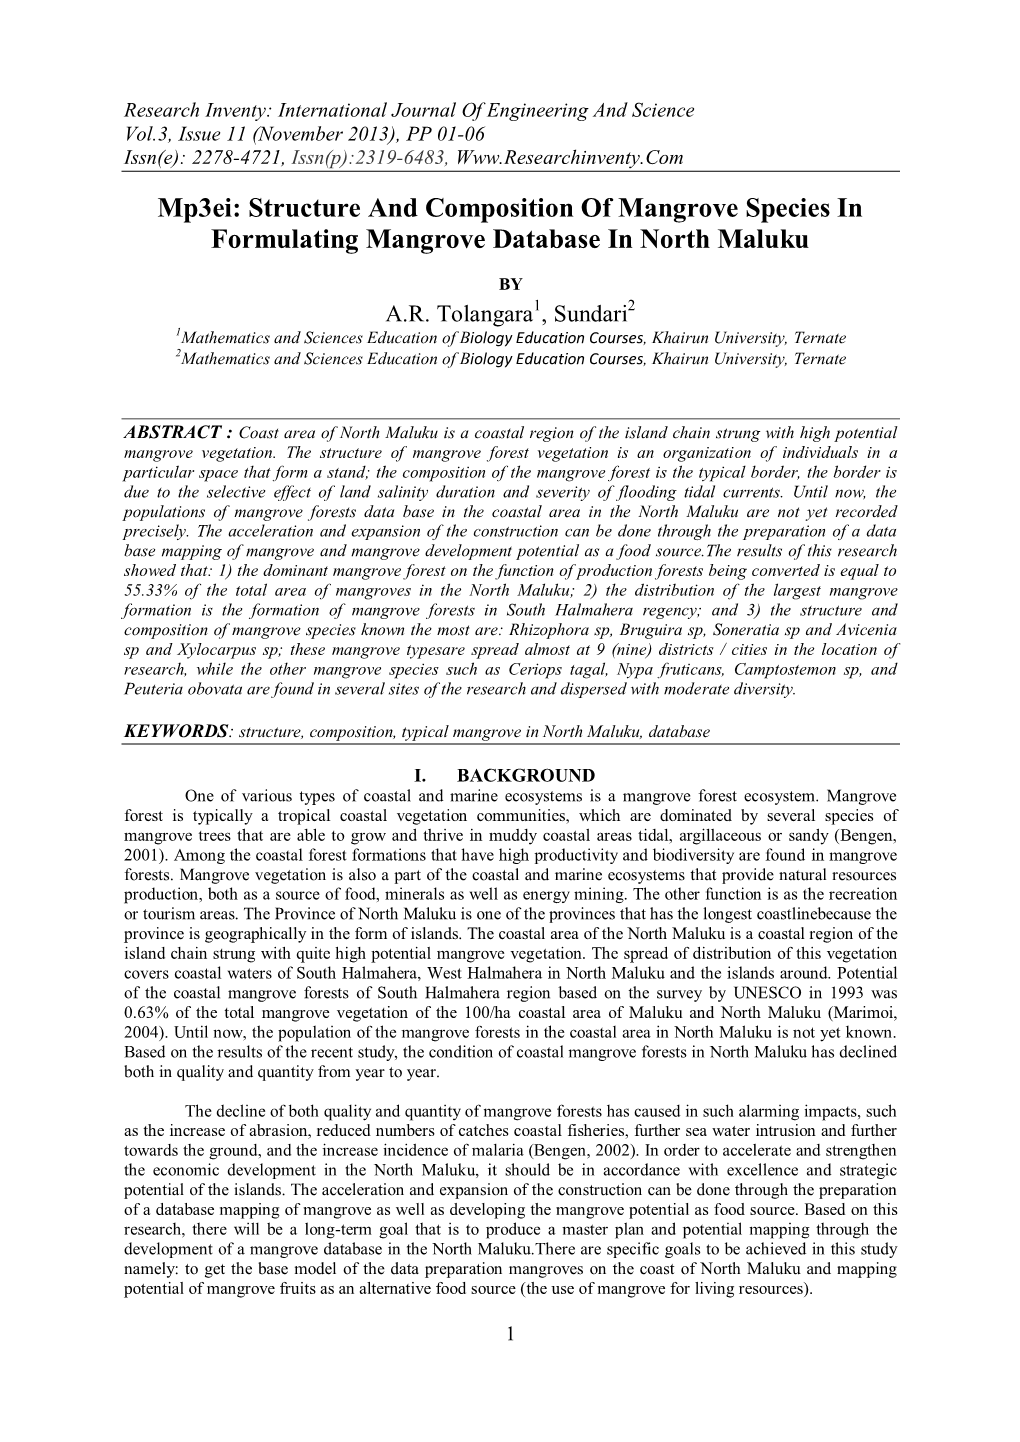 Mp3ei: Structure and Composition of Mangrove Species in Formulating Mangrove Database in North Maluku